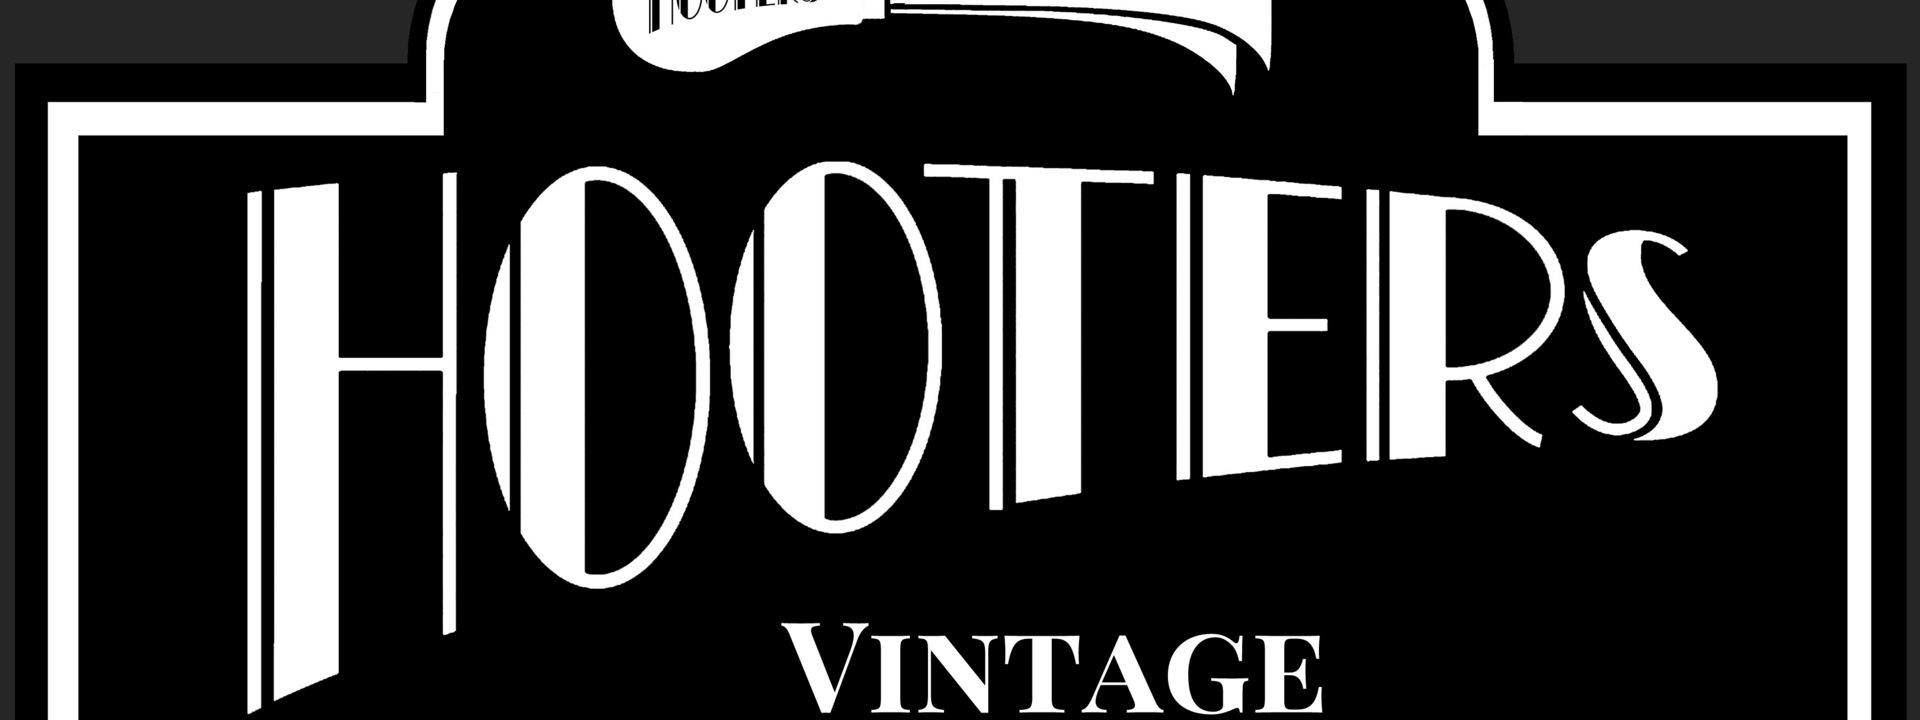 Logo: Hooters Vintage & Classic Vehicle Hire